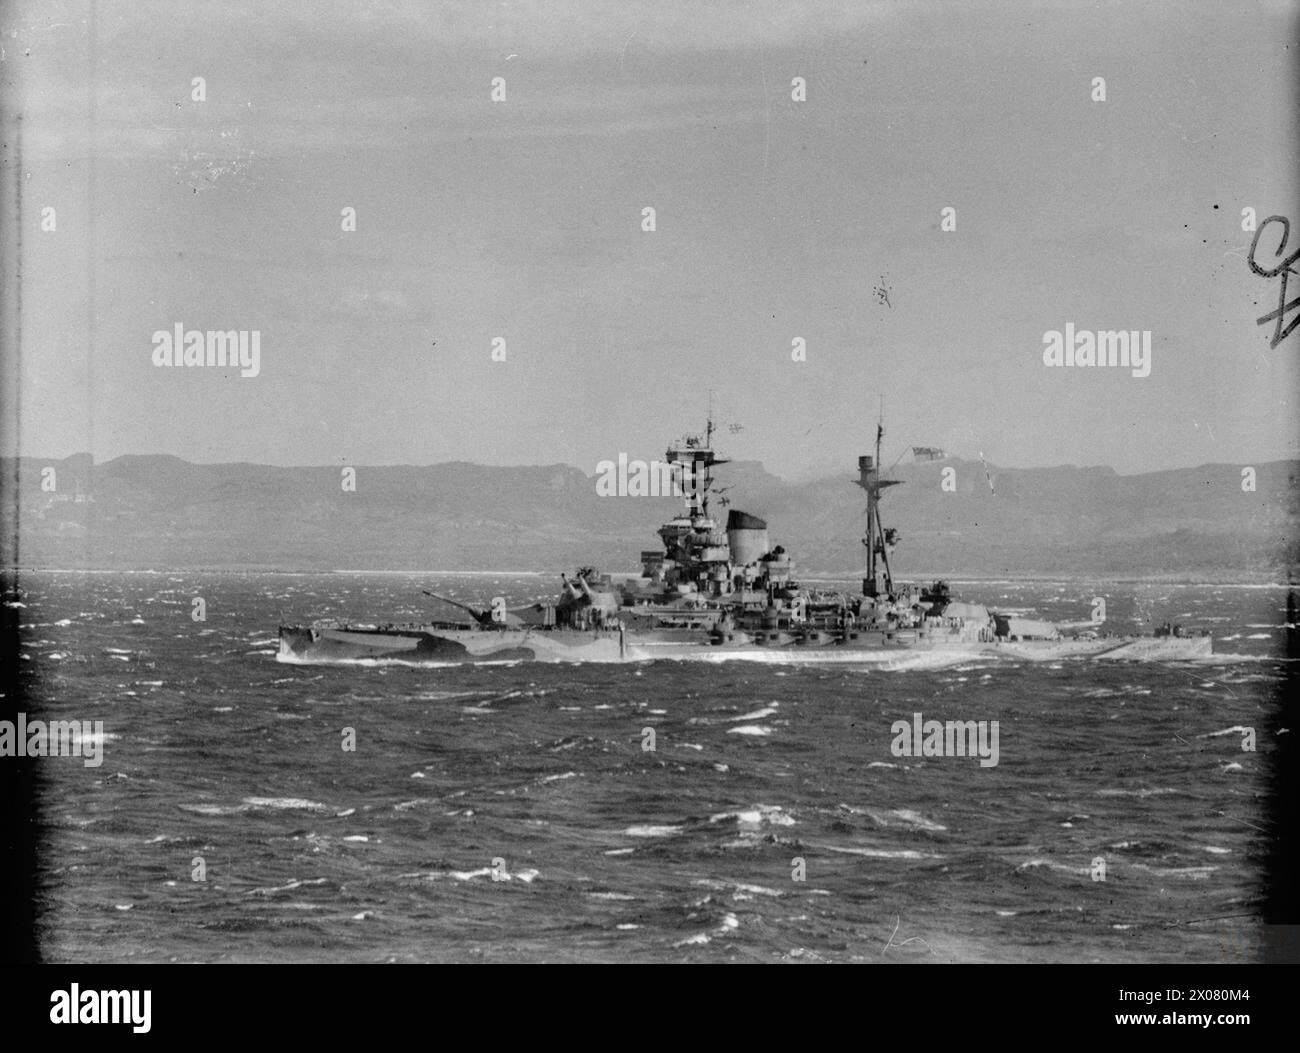 THE ROYAL NAVY DURING THE SECOND WORLD WAR - At the end of Operation Ironclad, the Allied landings on Madagascar. As seen from the Dido Class cruiser HMS HERMIONE, HMS RAMILLIES about to enter French Bay Harbour, near Diego Suarez, Madagascar  Royal Navy, RAMILLIES (HMS), battleship Stock Photo